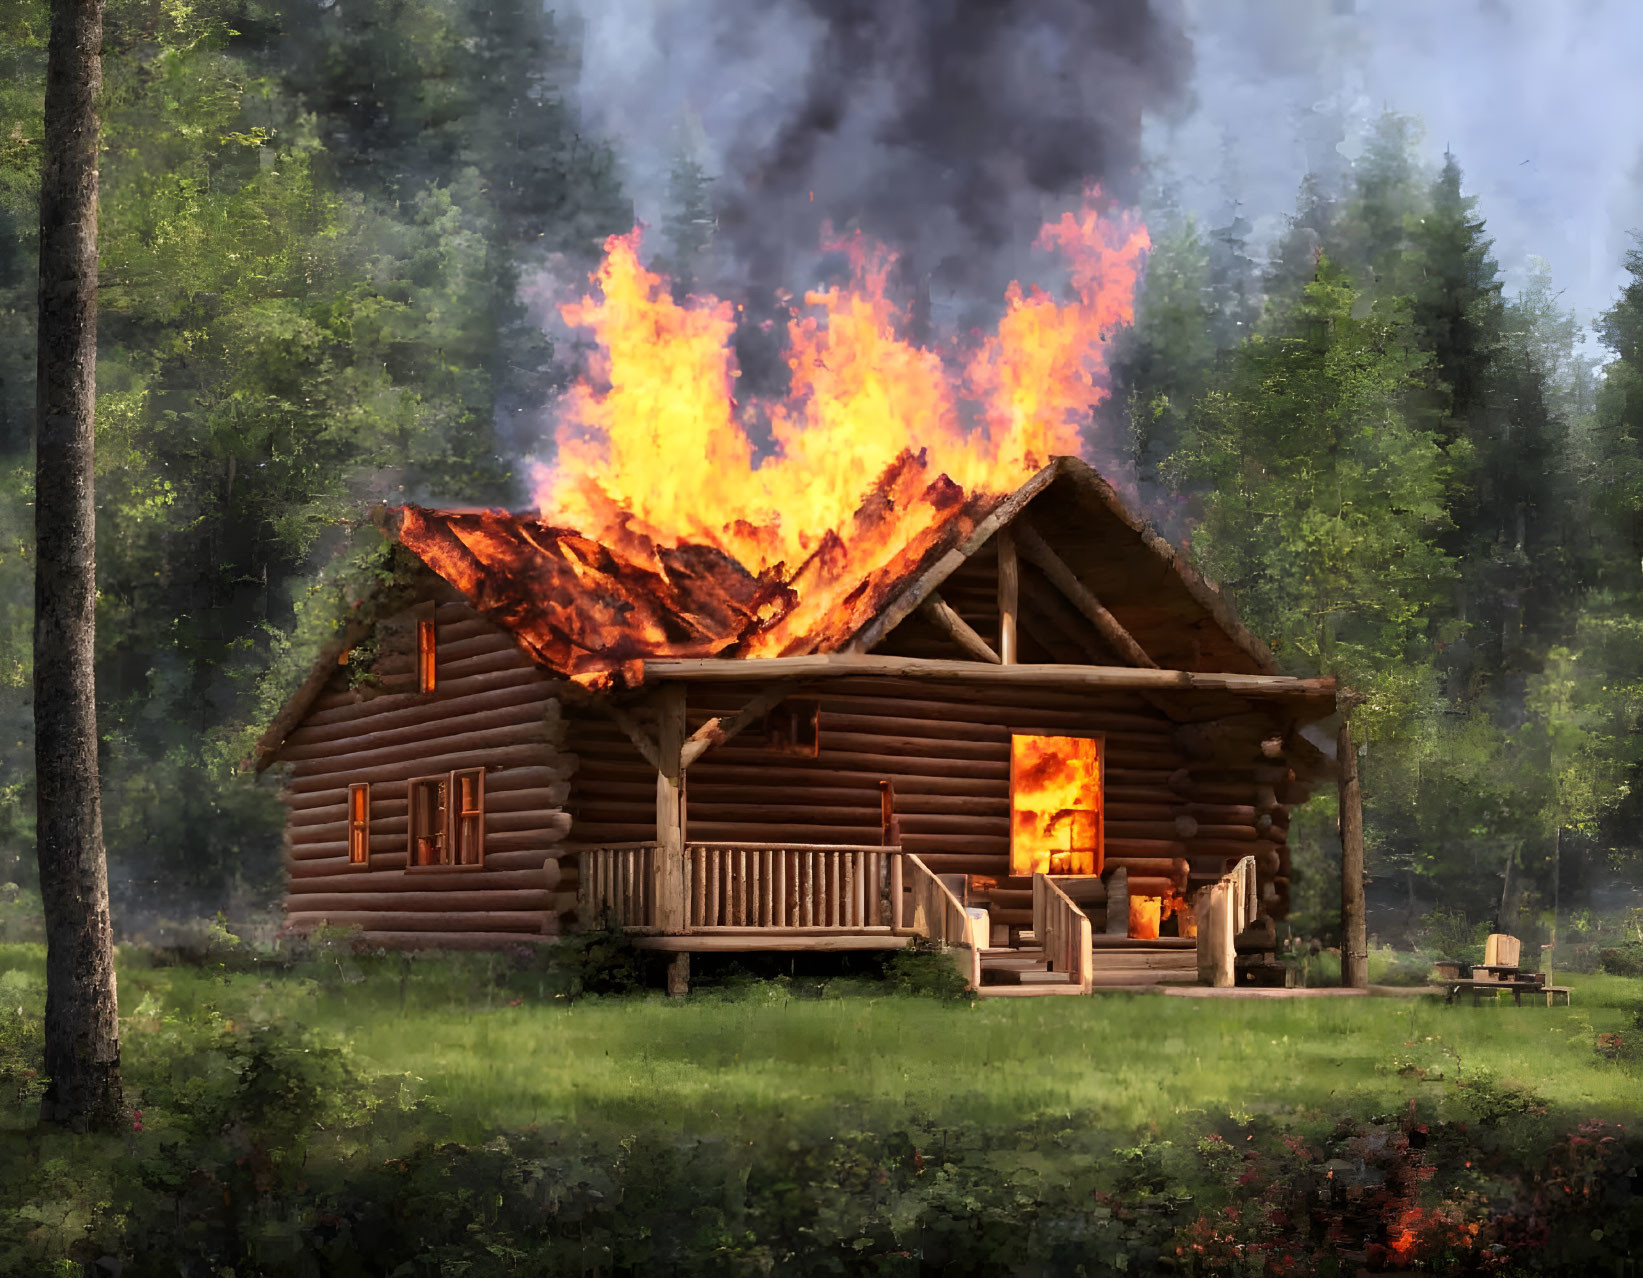 Forest log cabin engulfed in flames with dense smoke rising